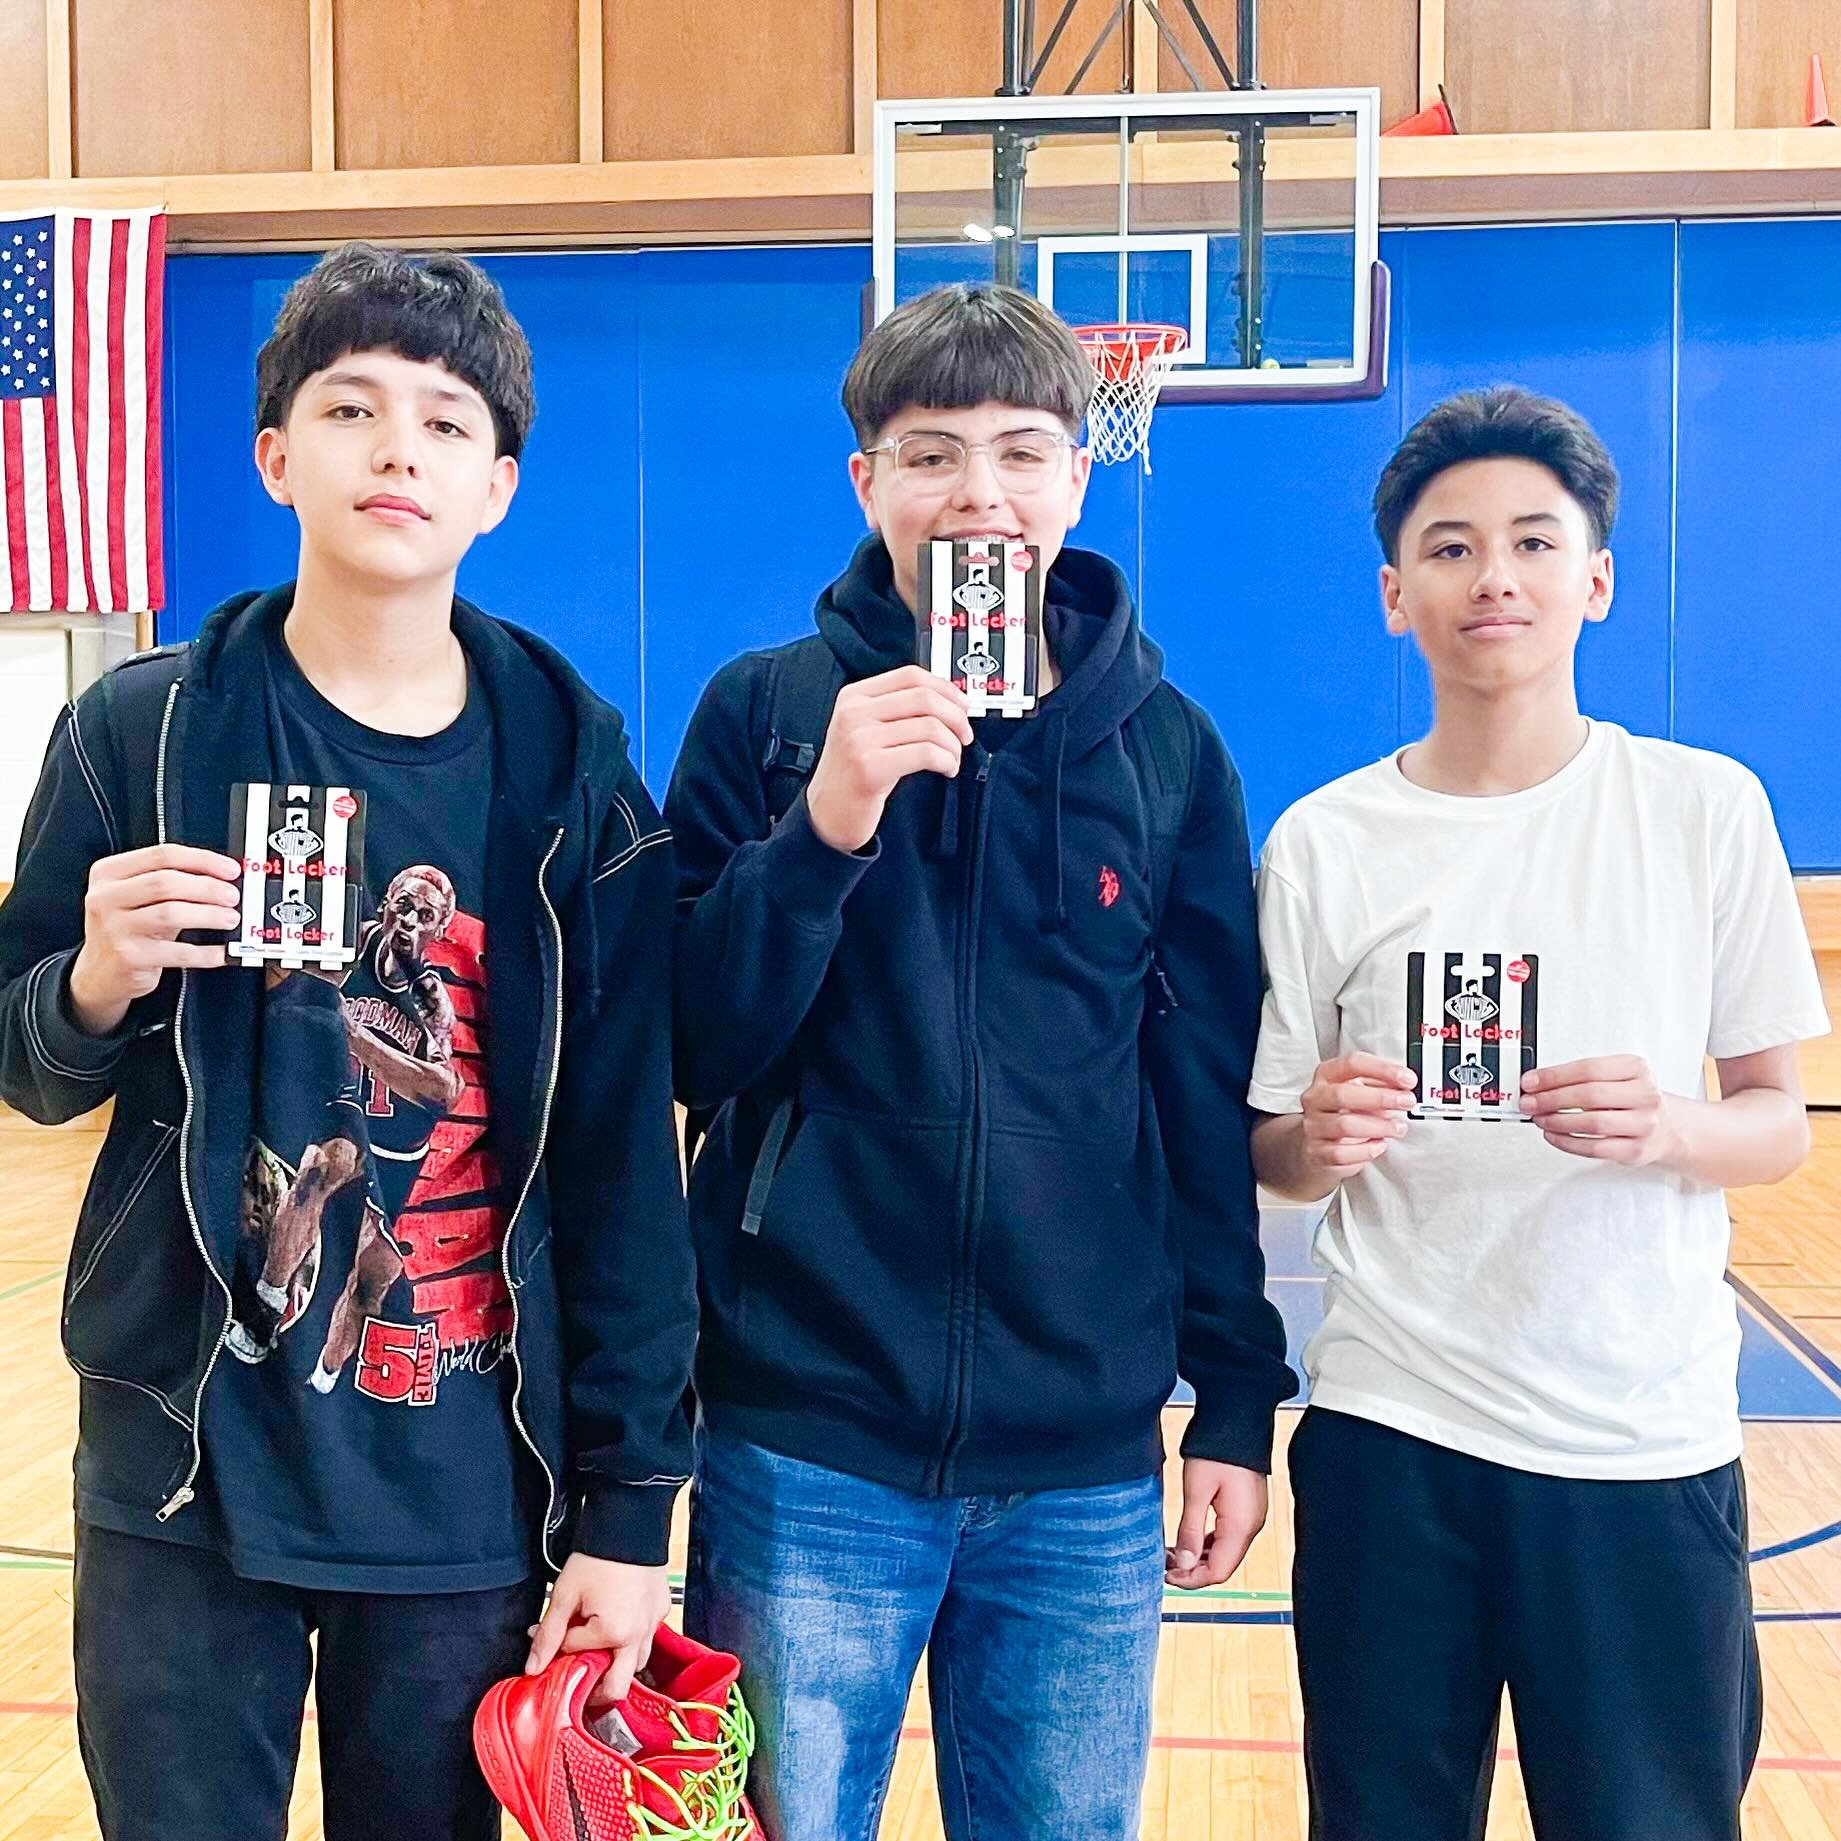 Congrats to our student-athletes of the month! We stress the importance of showing up on-time and ready to work in all facets of life. Over the last month, Vykter, Vinnie, and Eloy have 0 unexcused absences and 0 tardies to class. Their consistency h